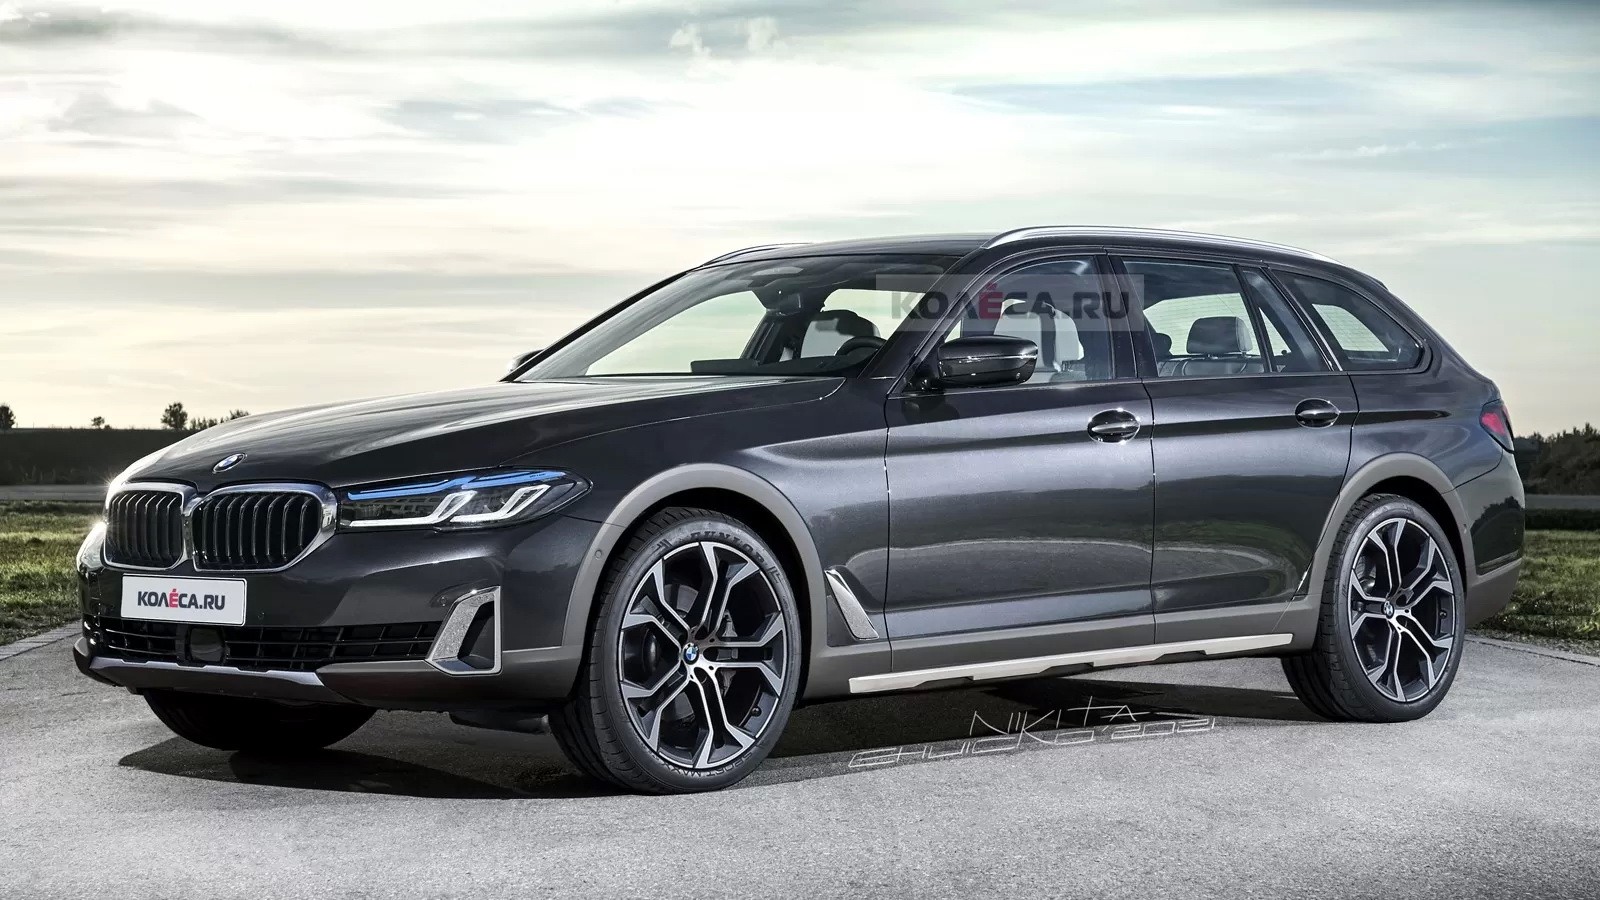 2021 BMW Series Touring Gets as a Sturdy Jacked-Up Wagon - autoevolution